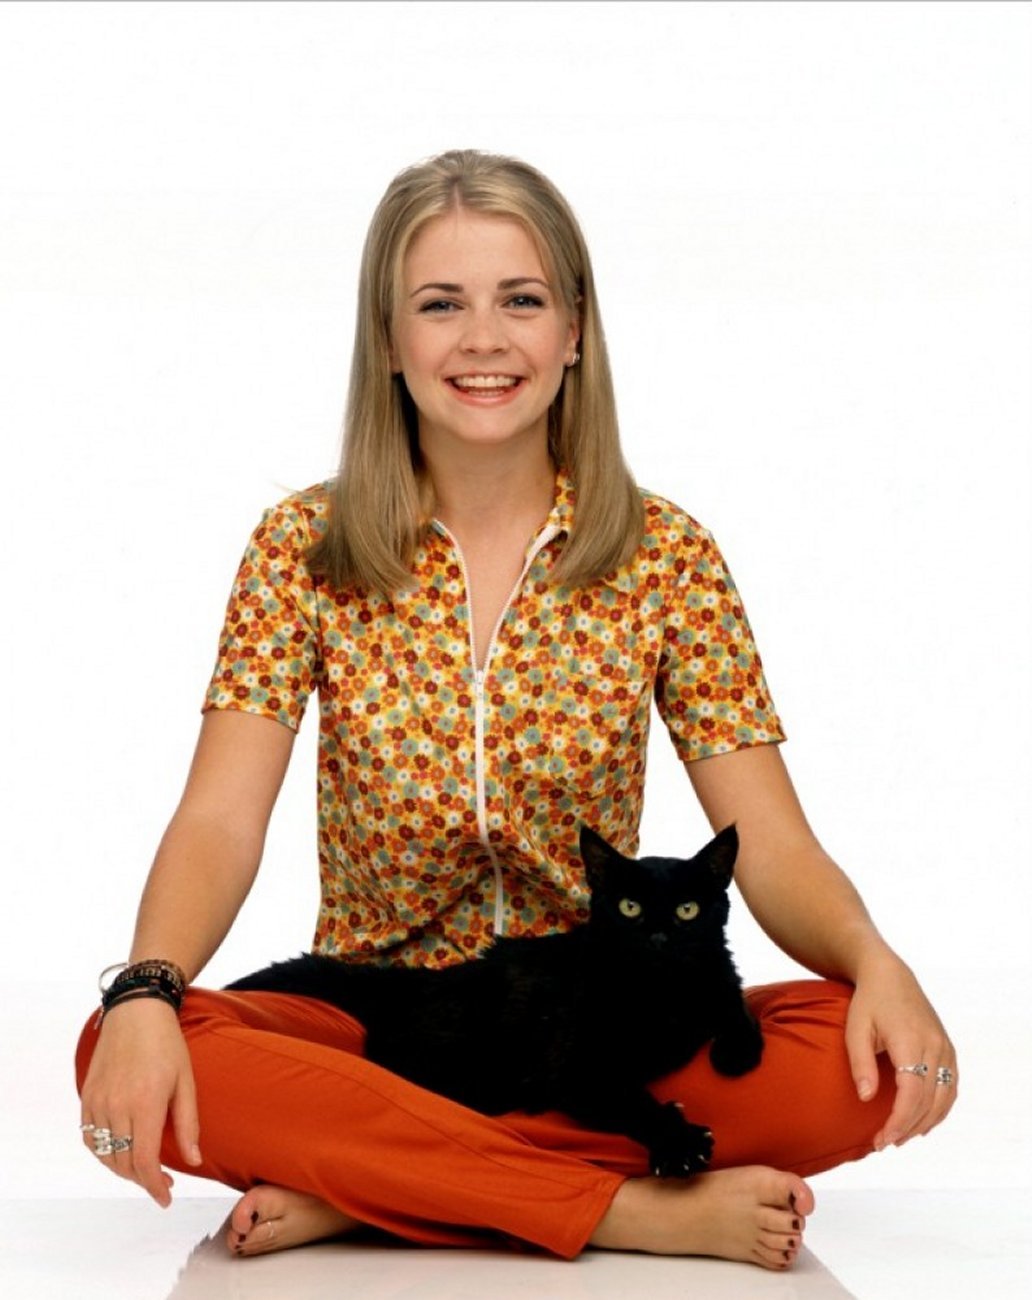 Sabrina the Teenage Witch The Animated Series - YouTube